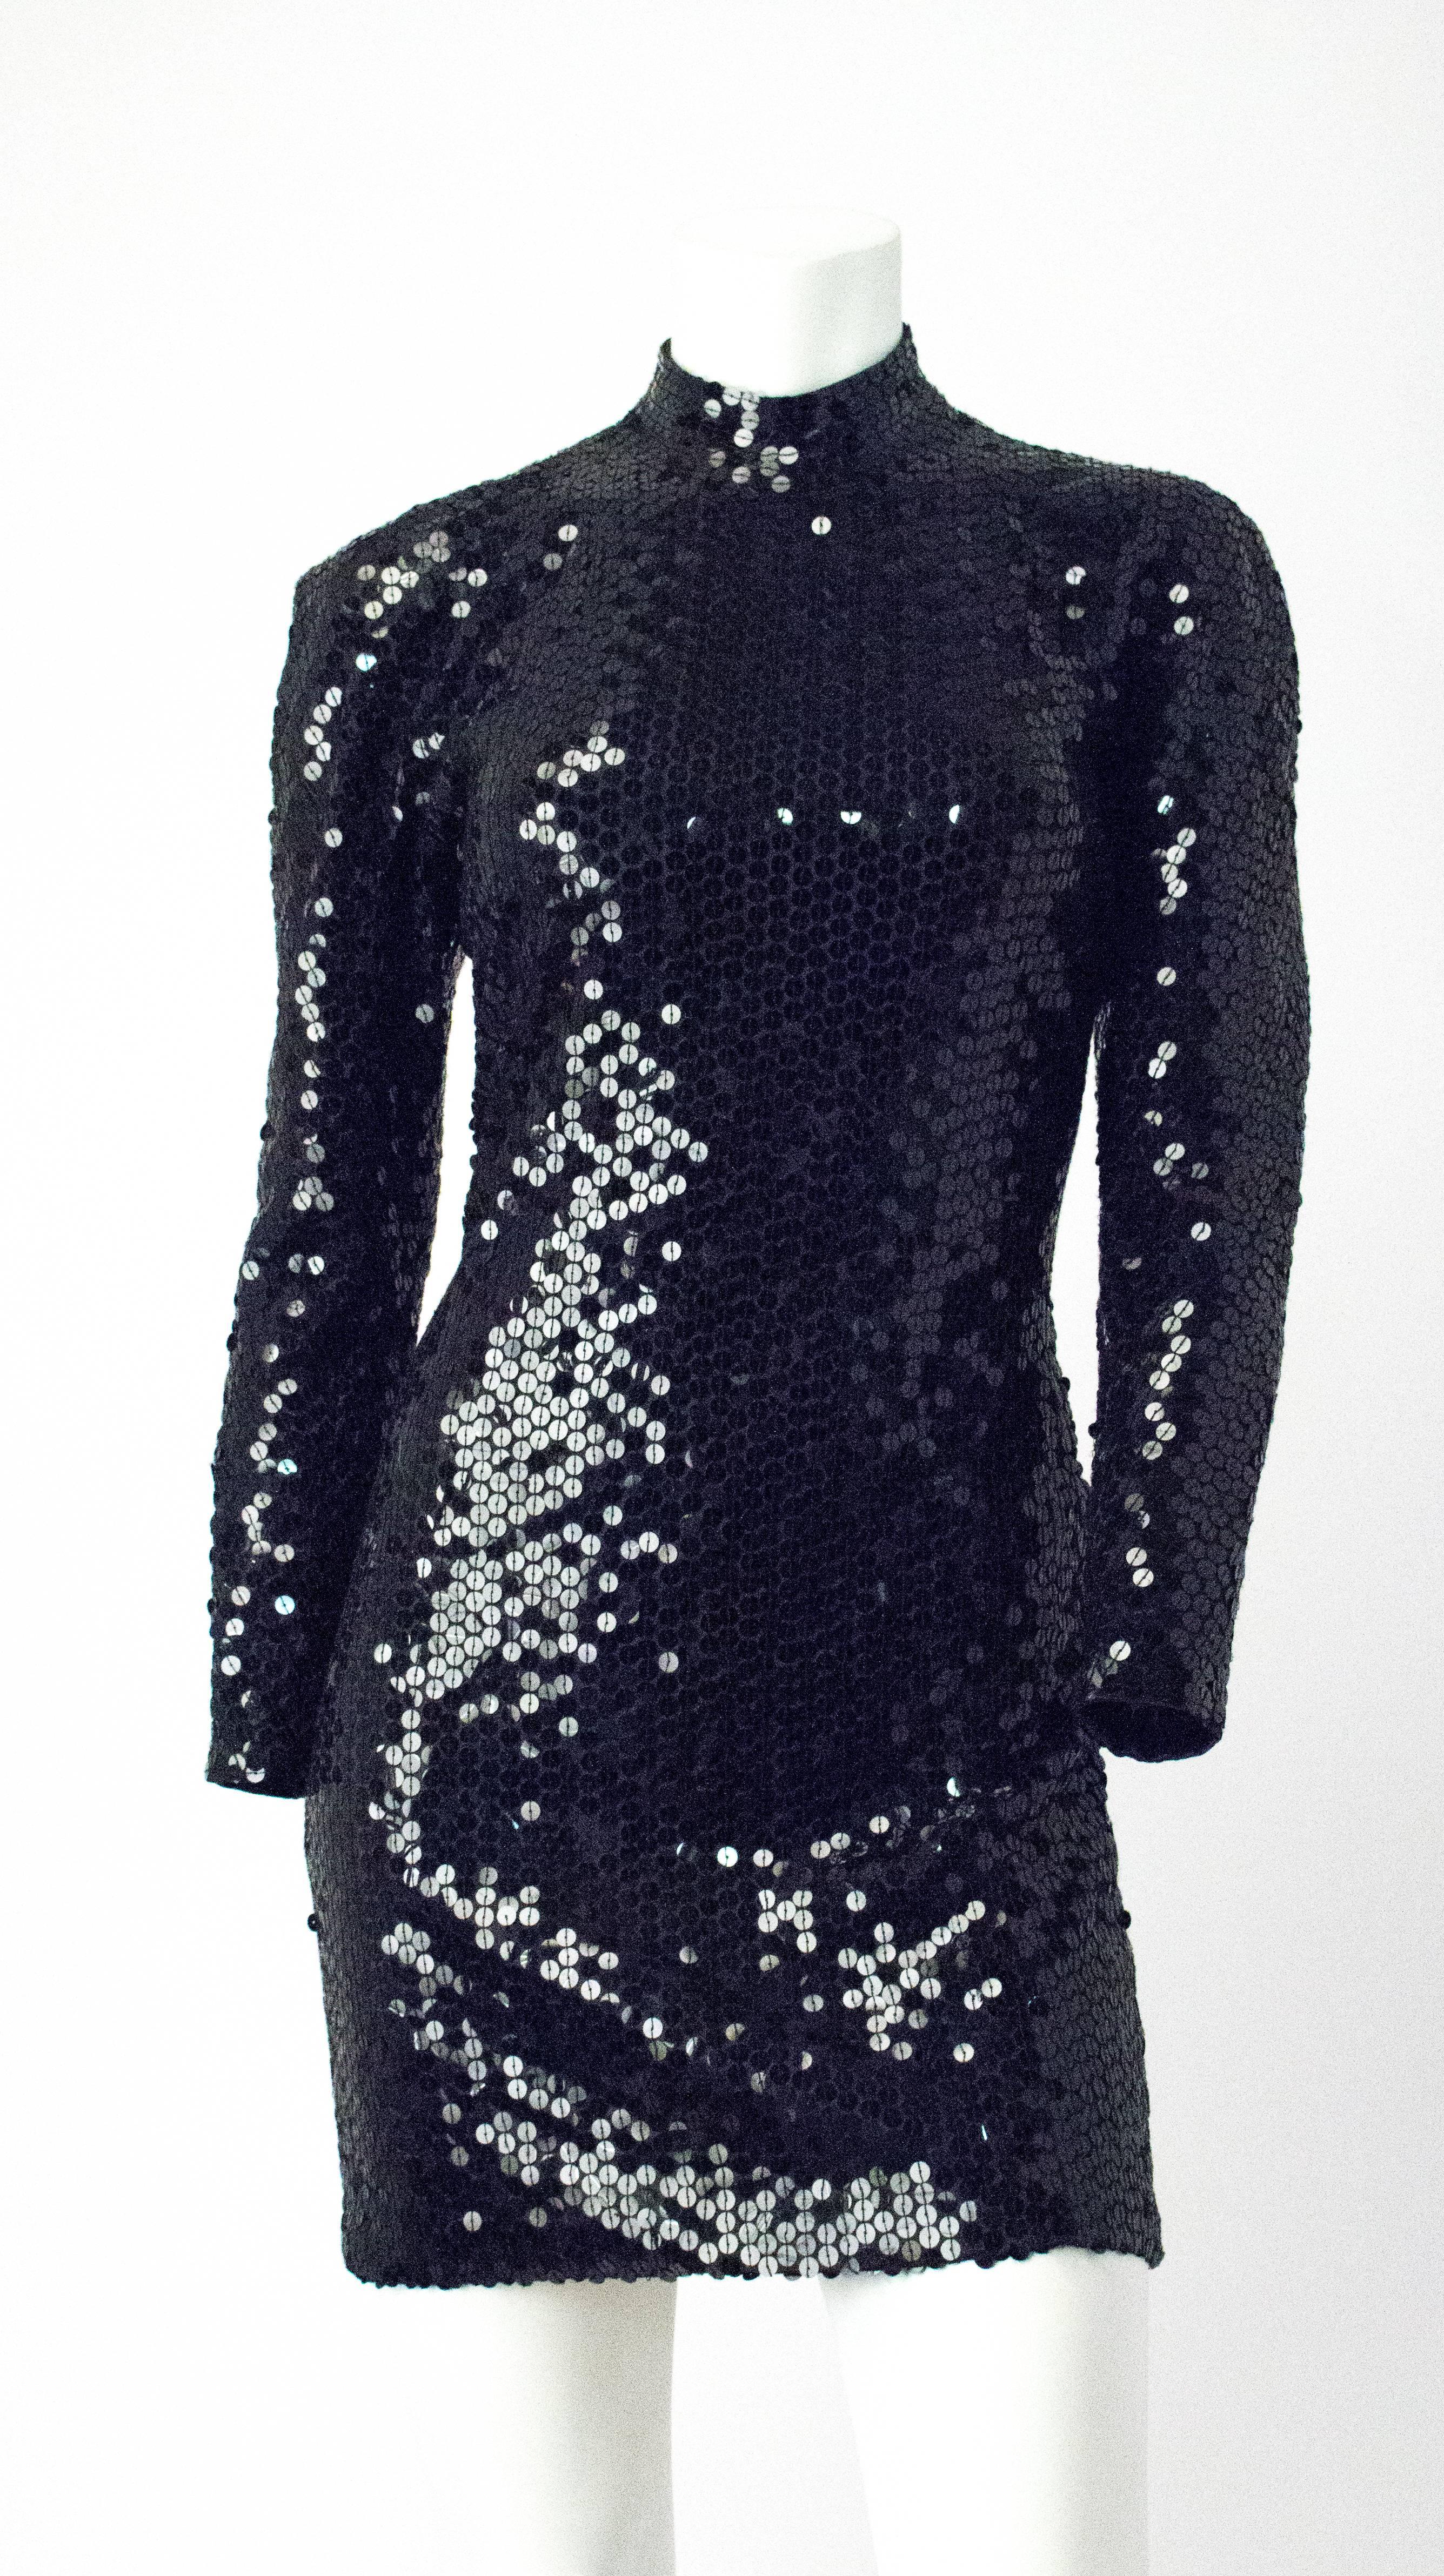 80s Oleg Cassini Black Sequin Cocktail Dress. Contour fitting, long sleeve with a high collar and open back. There is a center back zipper closure.

